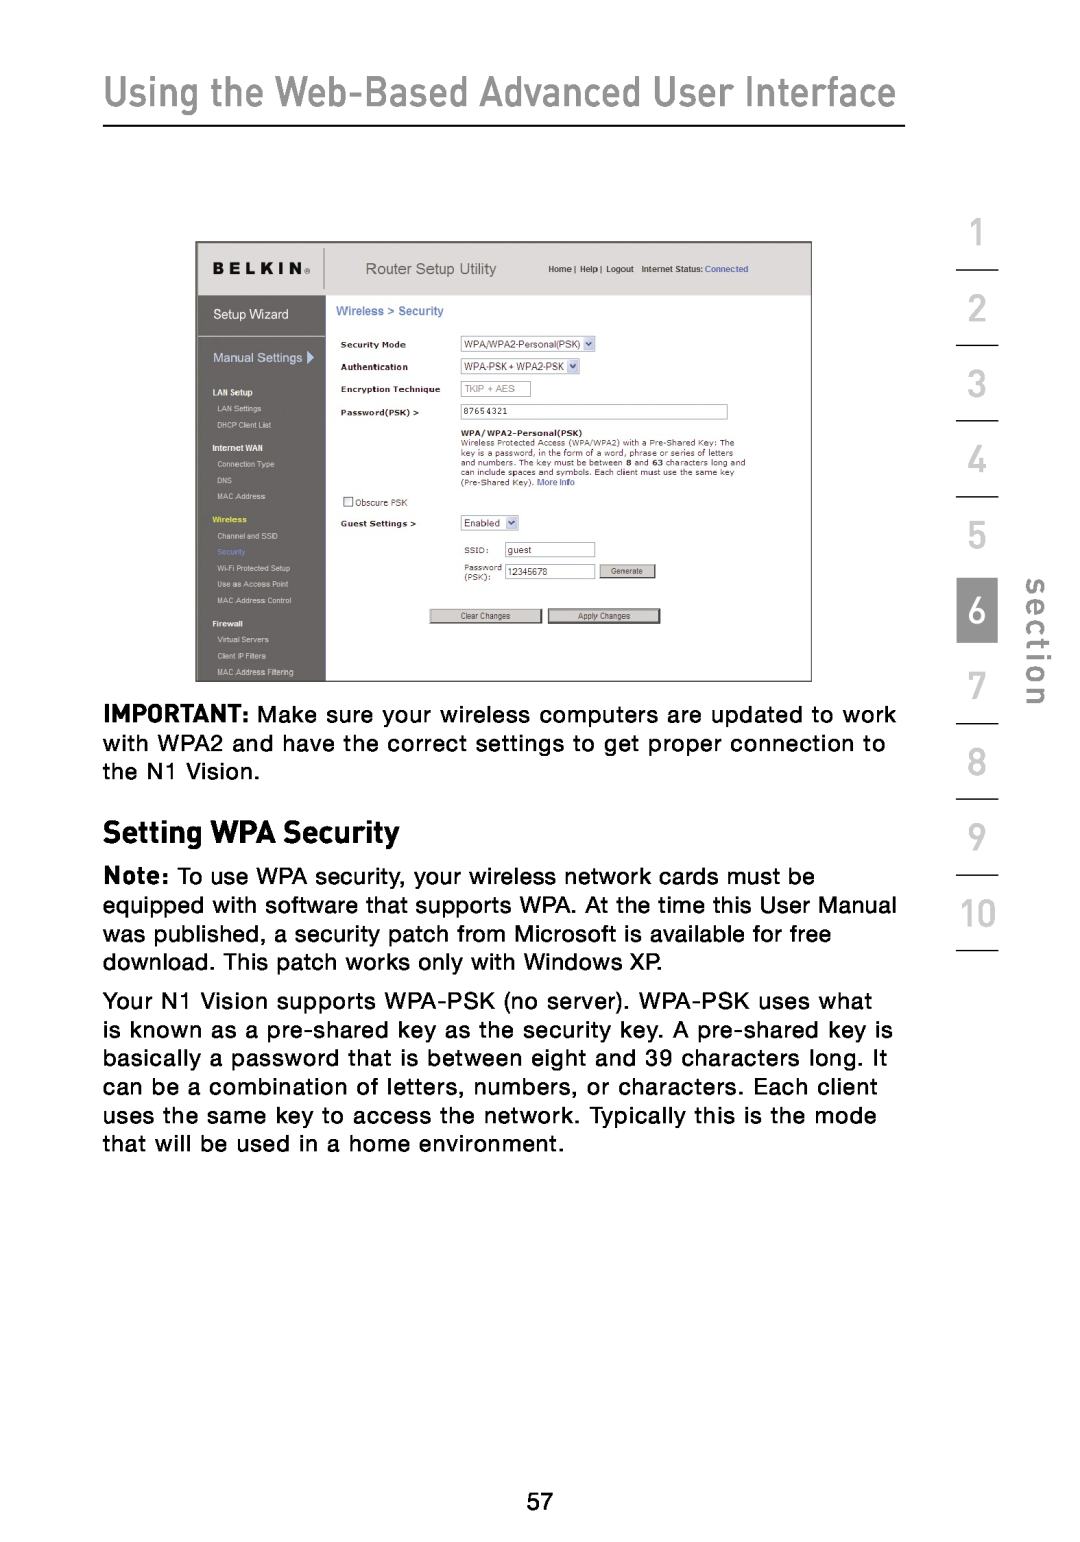 Belkin N1 user manual Setting WPA Security, Using the Web-Based Advanced User Interface, section 